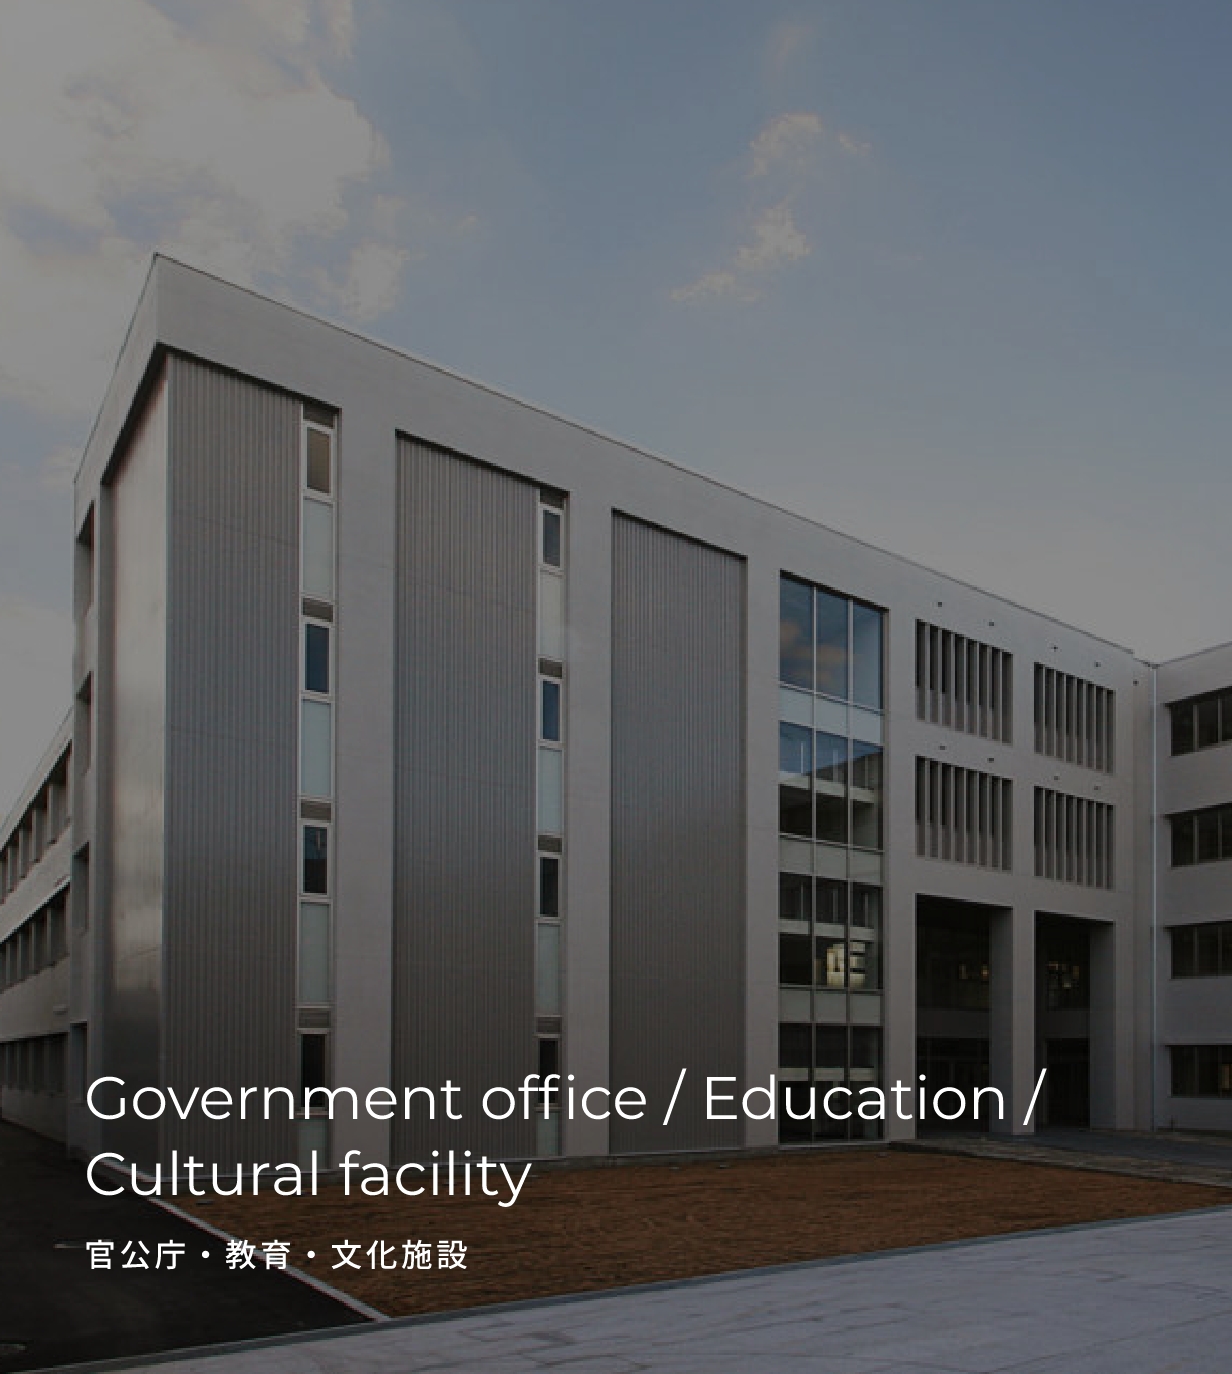 Government office / Education / Cultural facility 官公庁・教育・文化施設